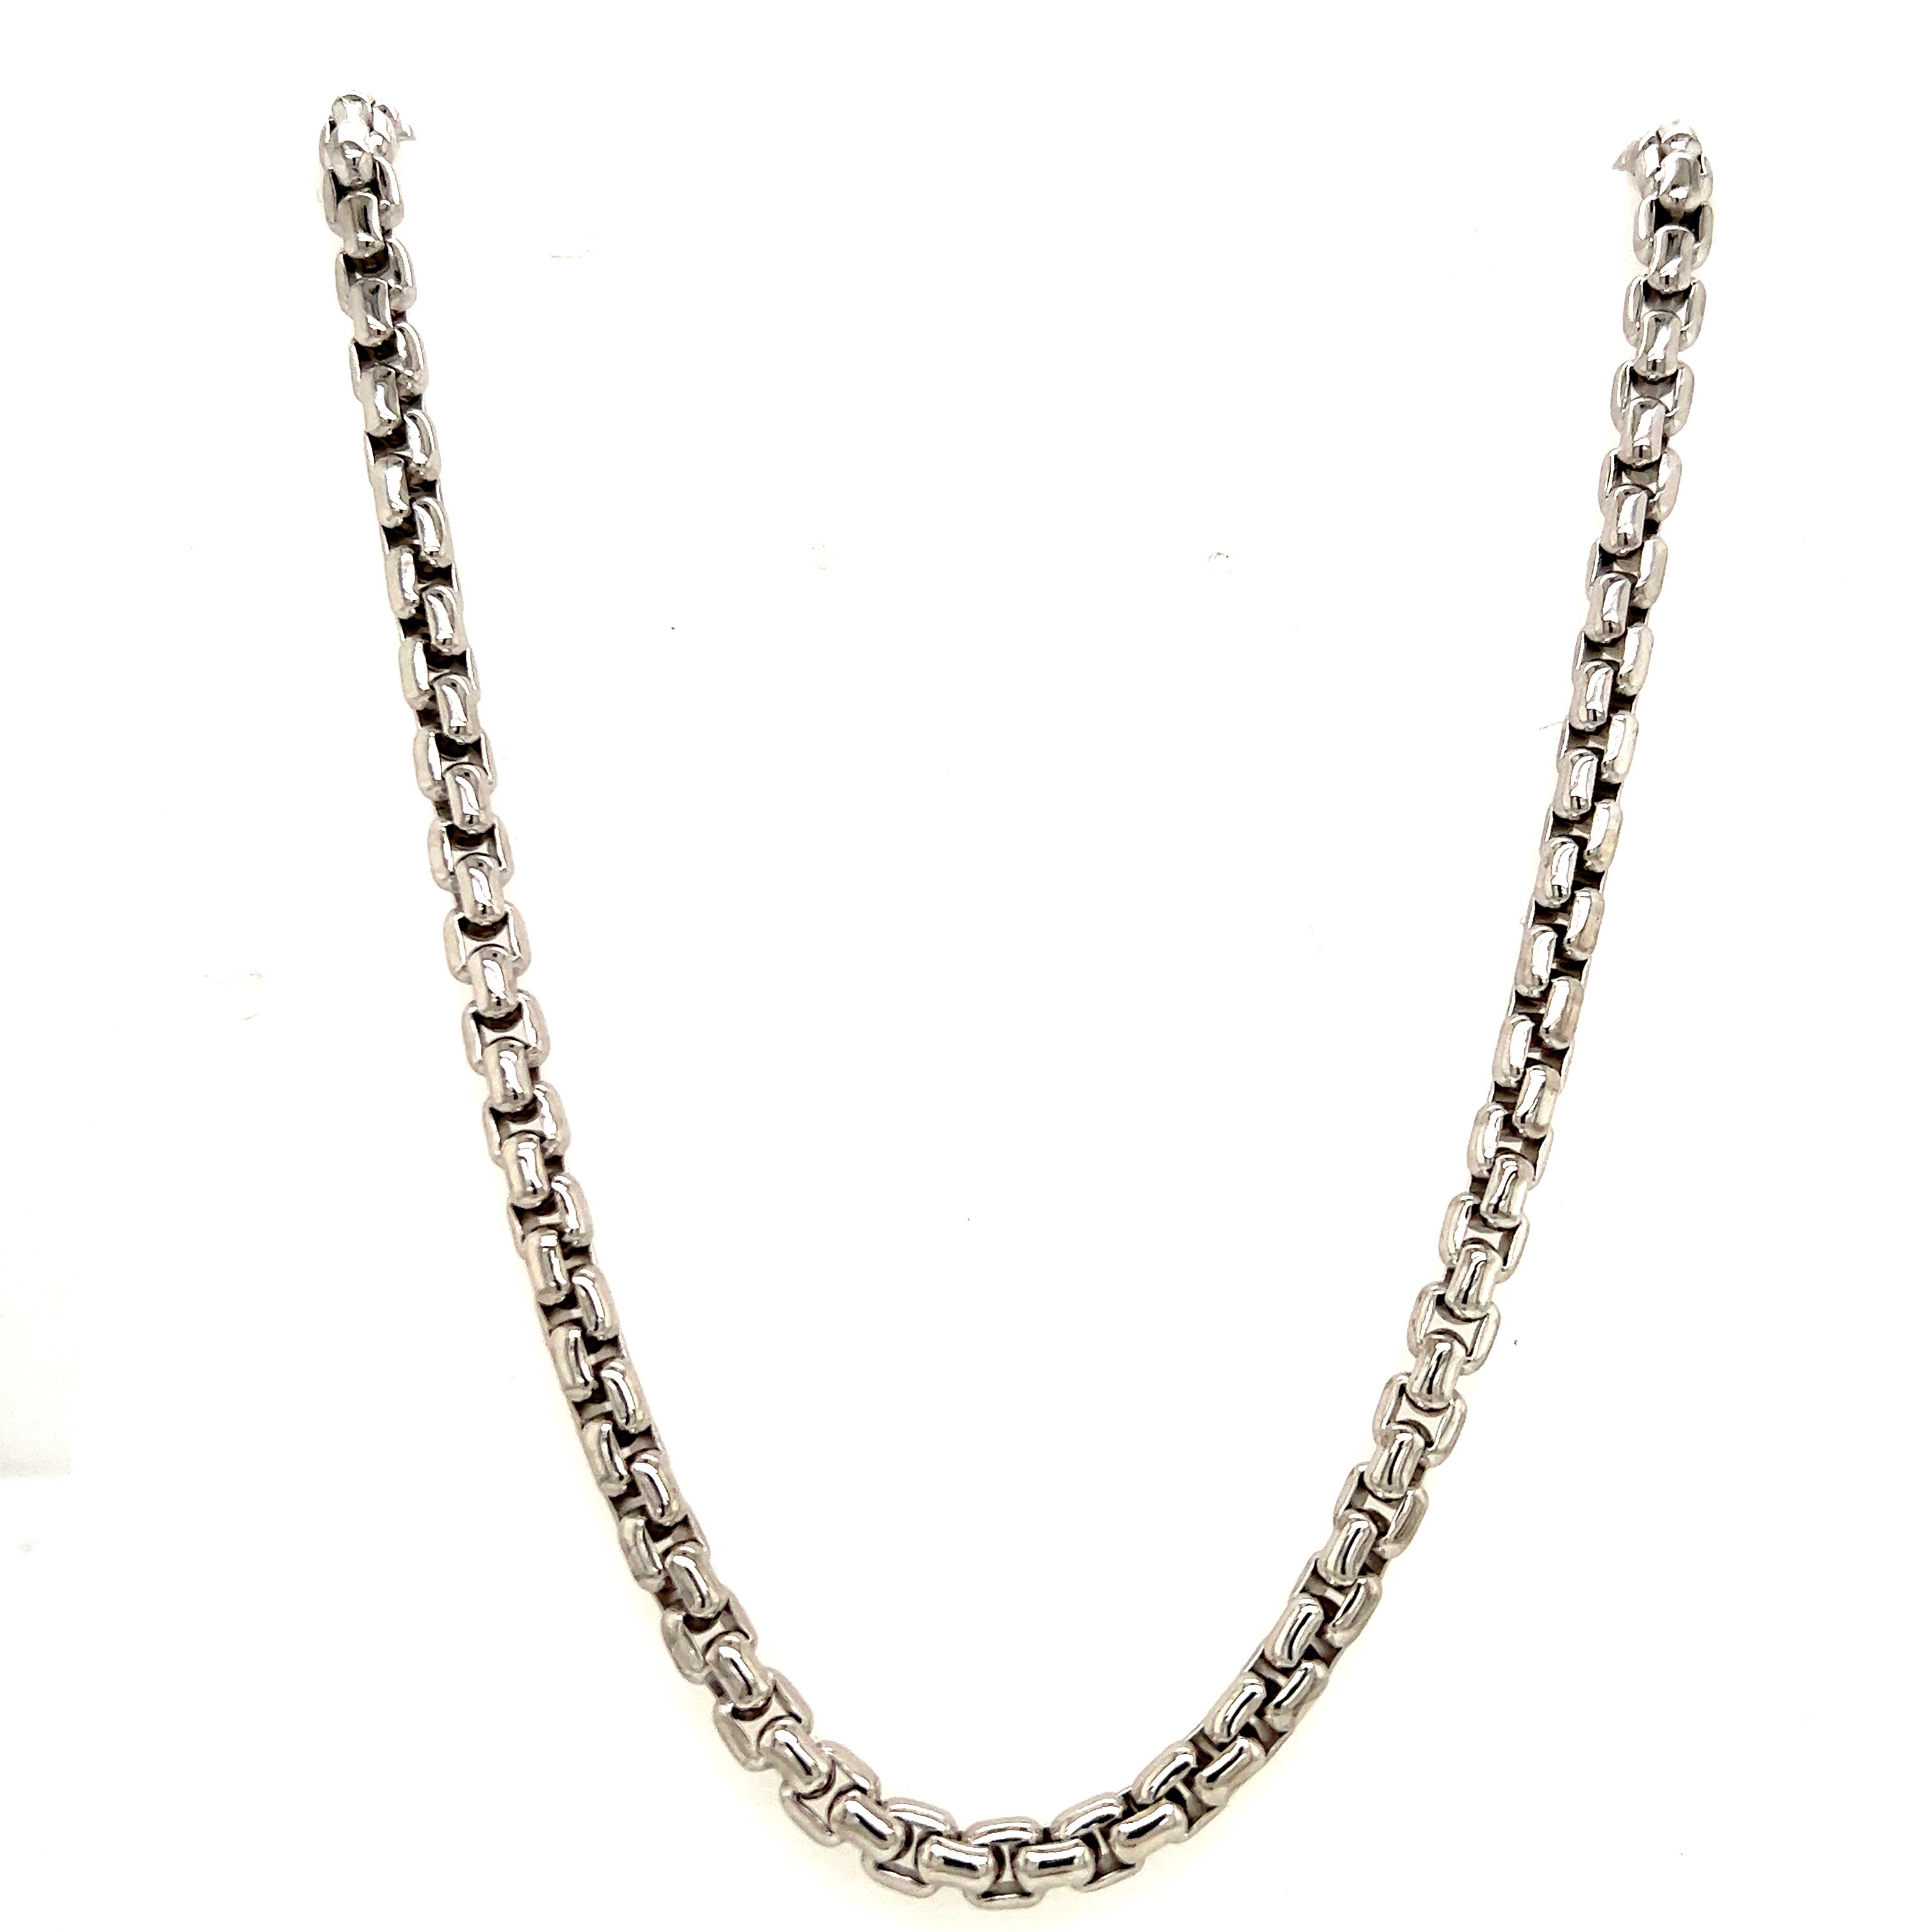 Great every day necklace from famed jewelry house Tiffany & Co. The necklace is crafted in solid 18k white gold and is a box link design. The necklace measures 20